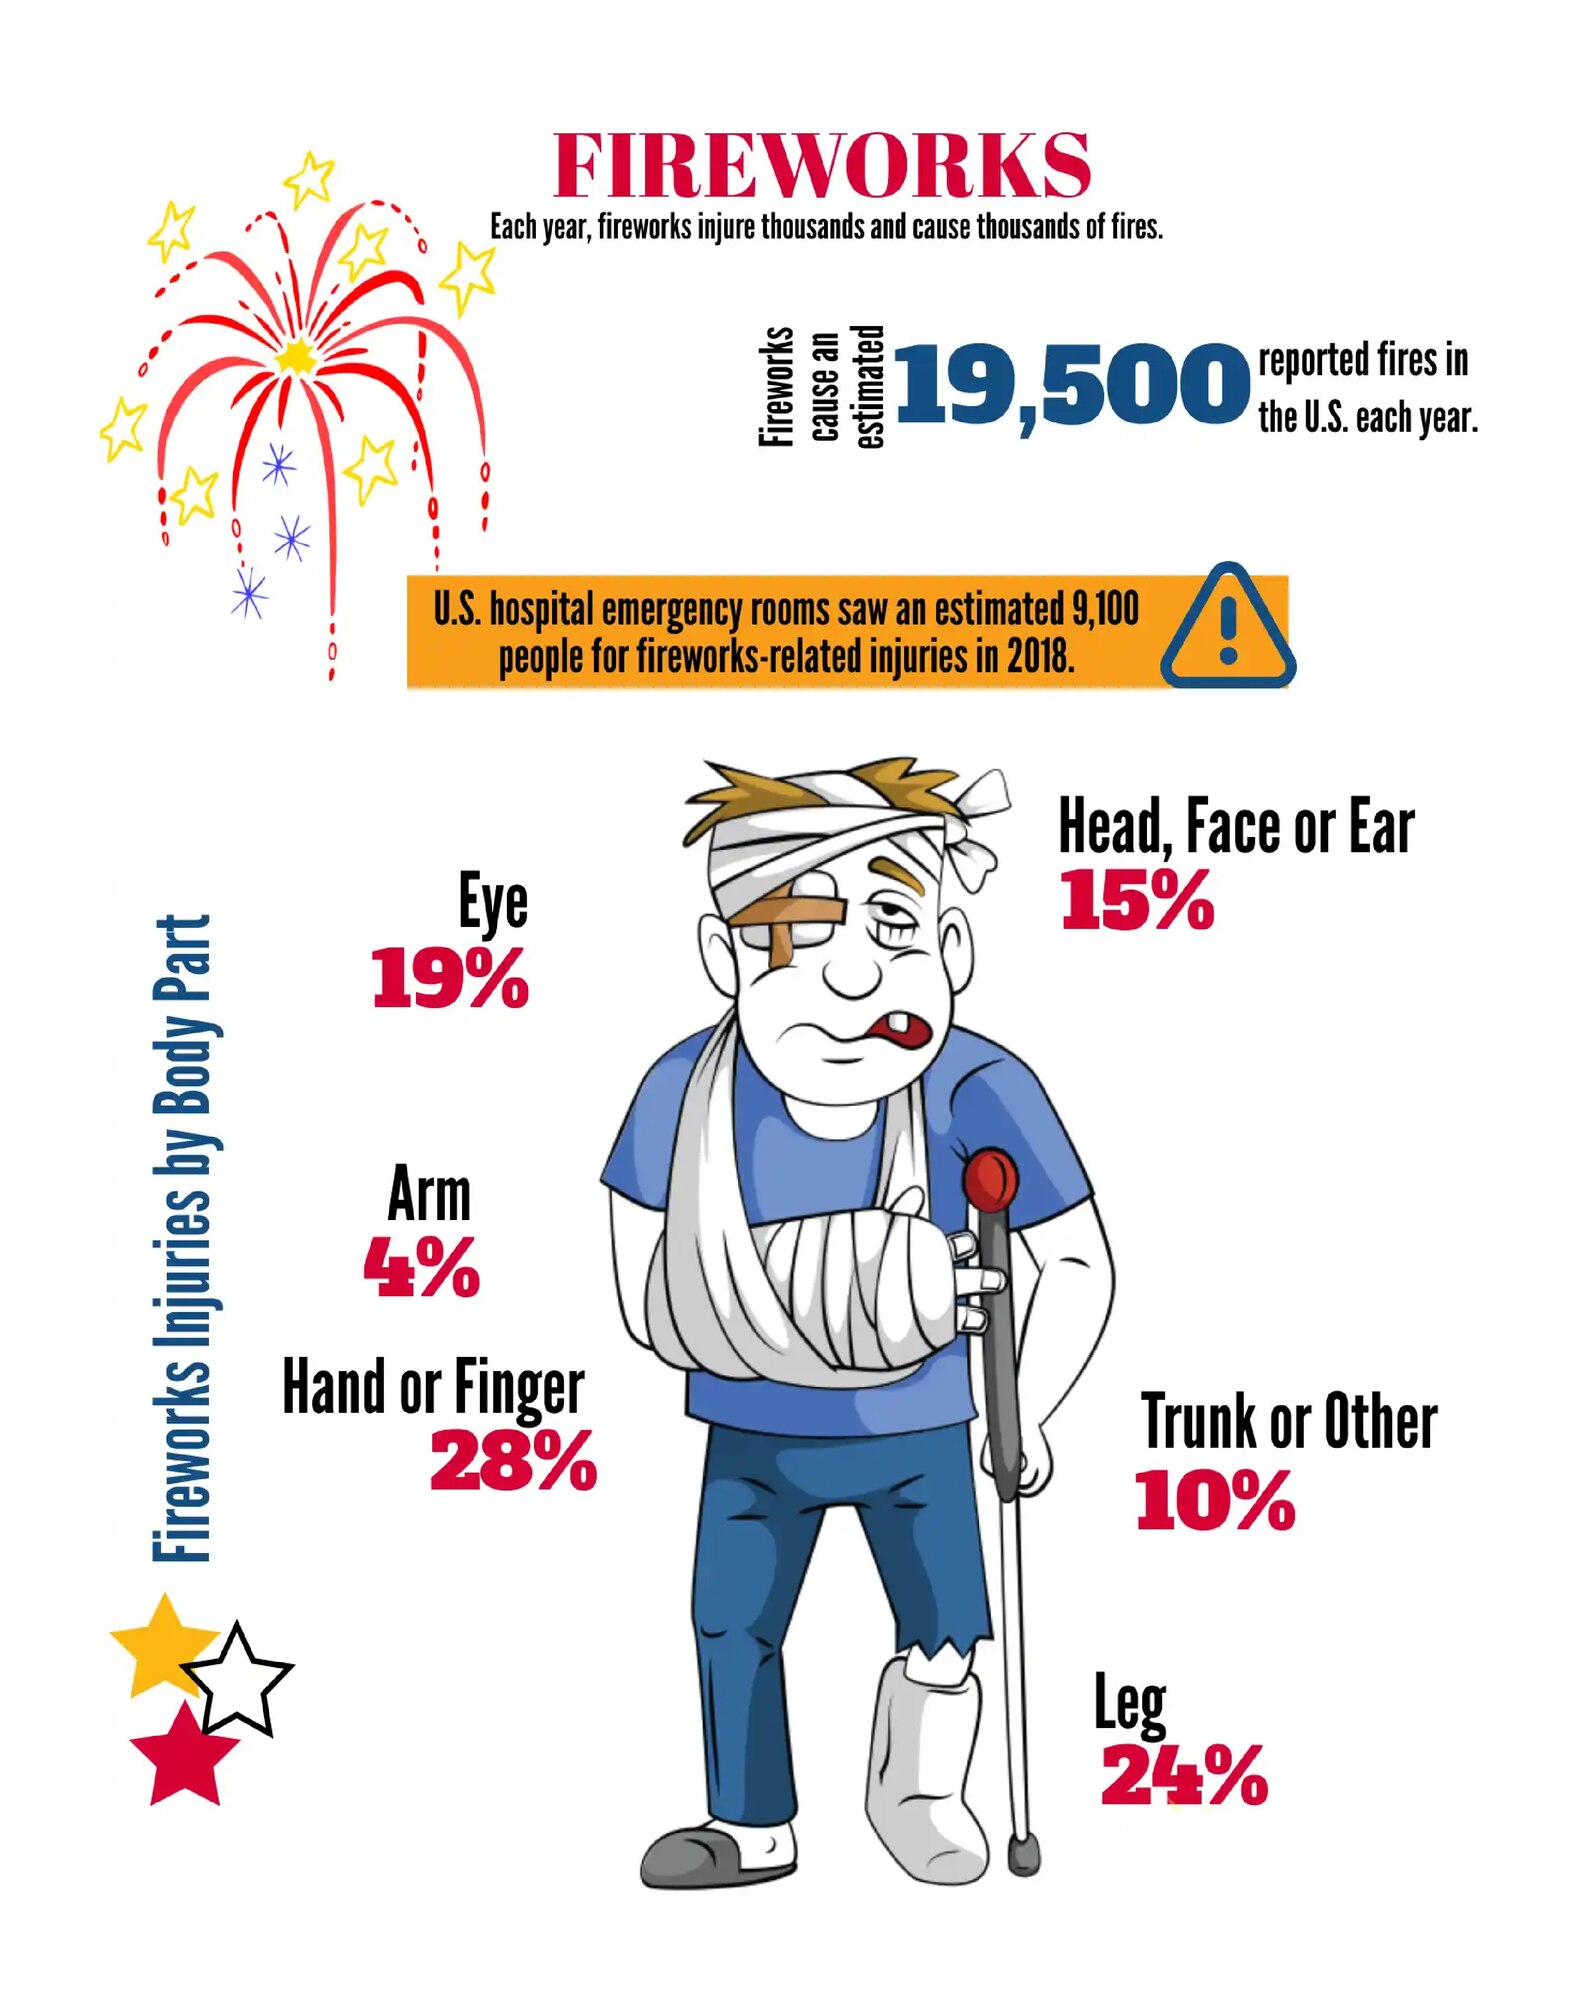 Arnold Air Force Base Fire and Emergency Services officials are urging base personnel to keep safety at the forefront during their Fourth of July celebrations. In 2018, emergency rooms across the U.S. saw more than 9,000 people for fireworks-related injuries, according to the National Fire Protection Association. (National Fire Protection Association graphic)